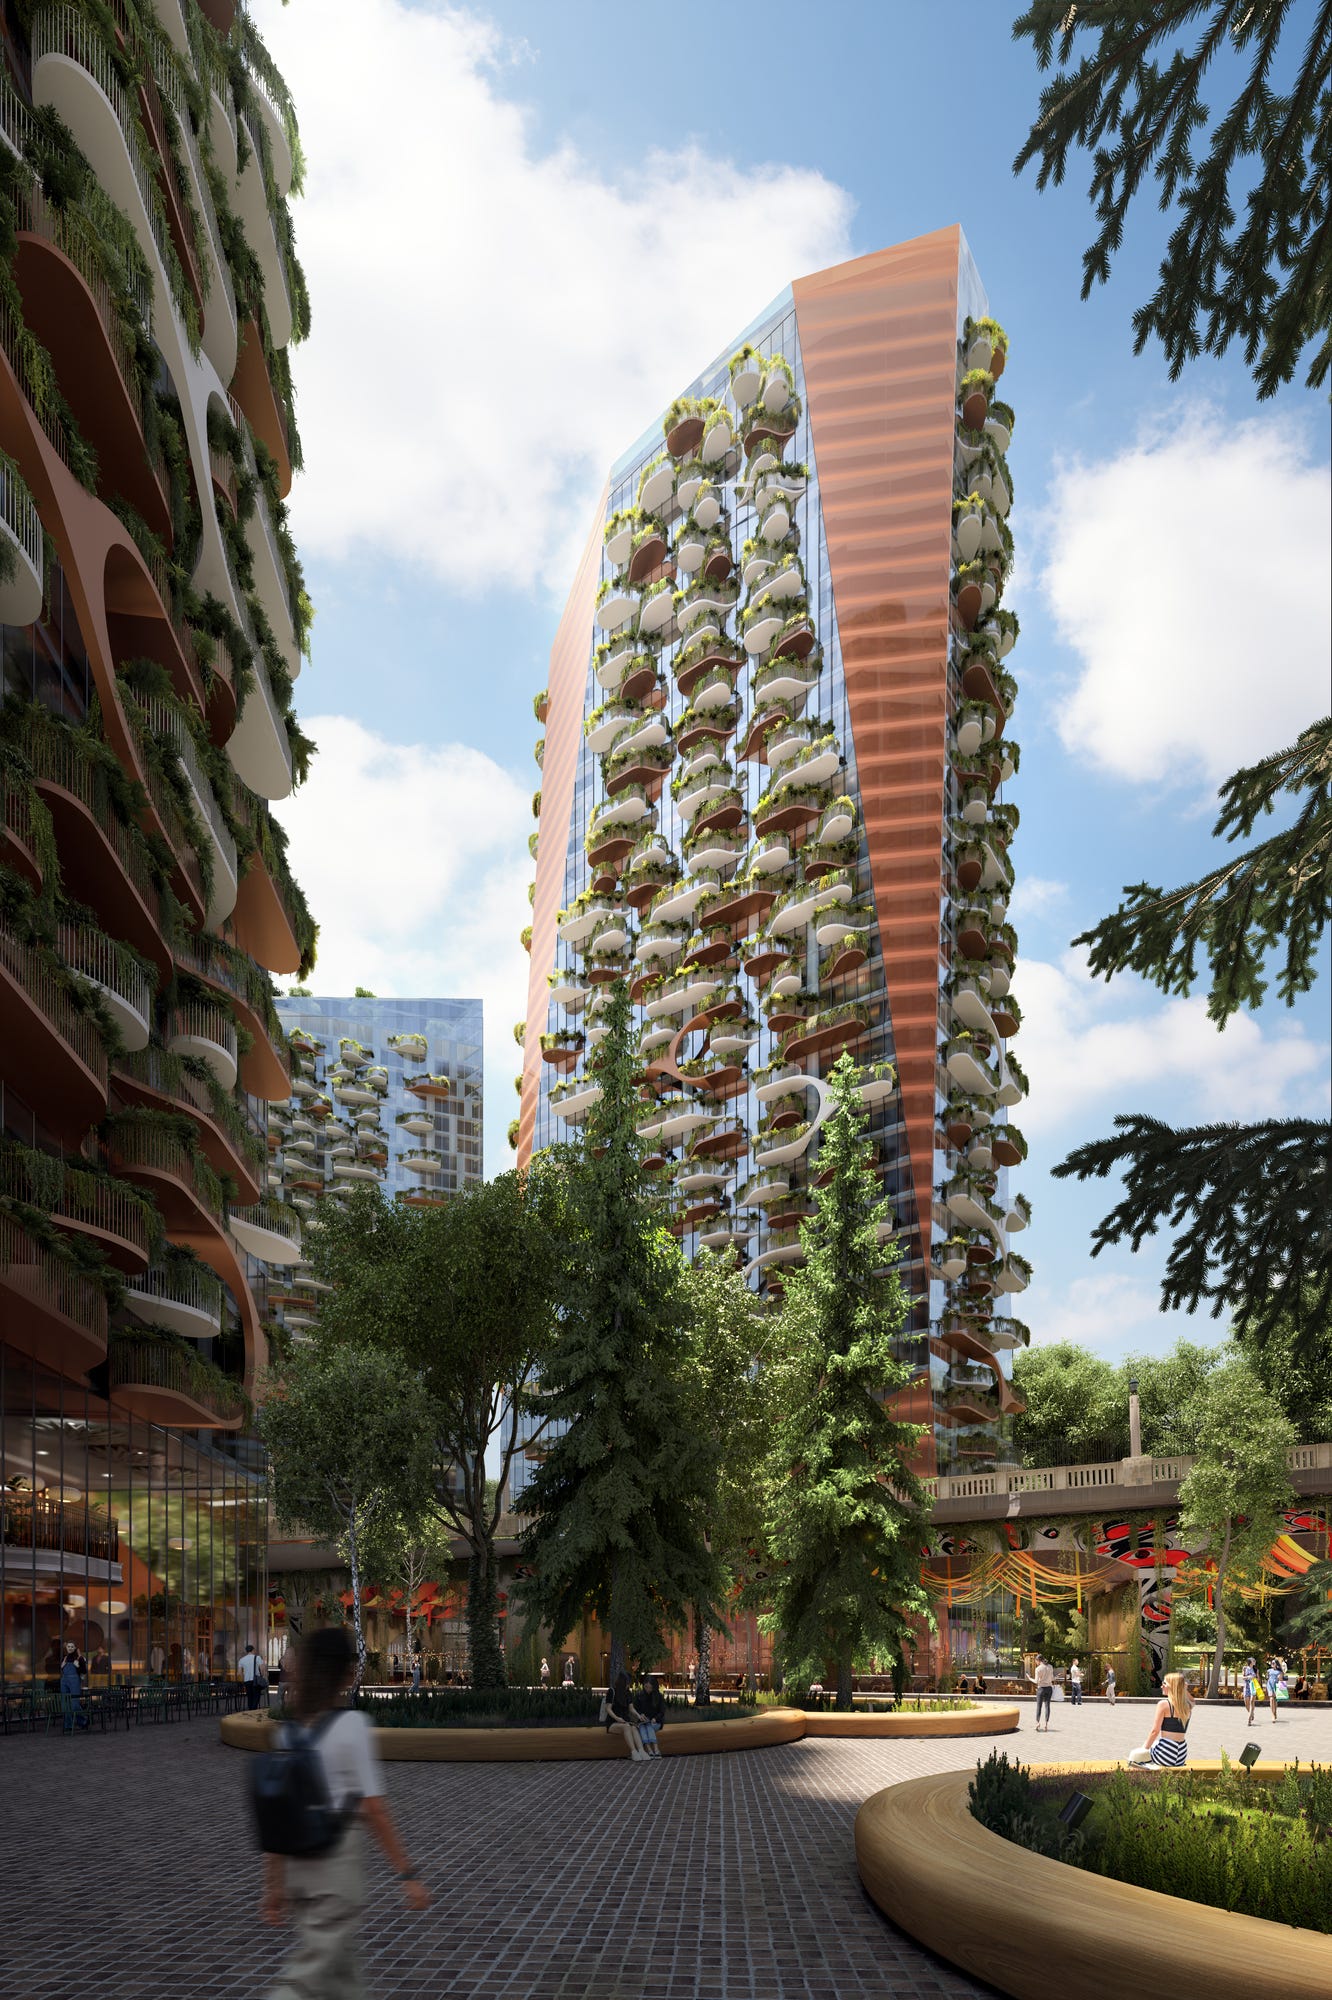 A rendering of a skyscraper with plant-filled balconies